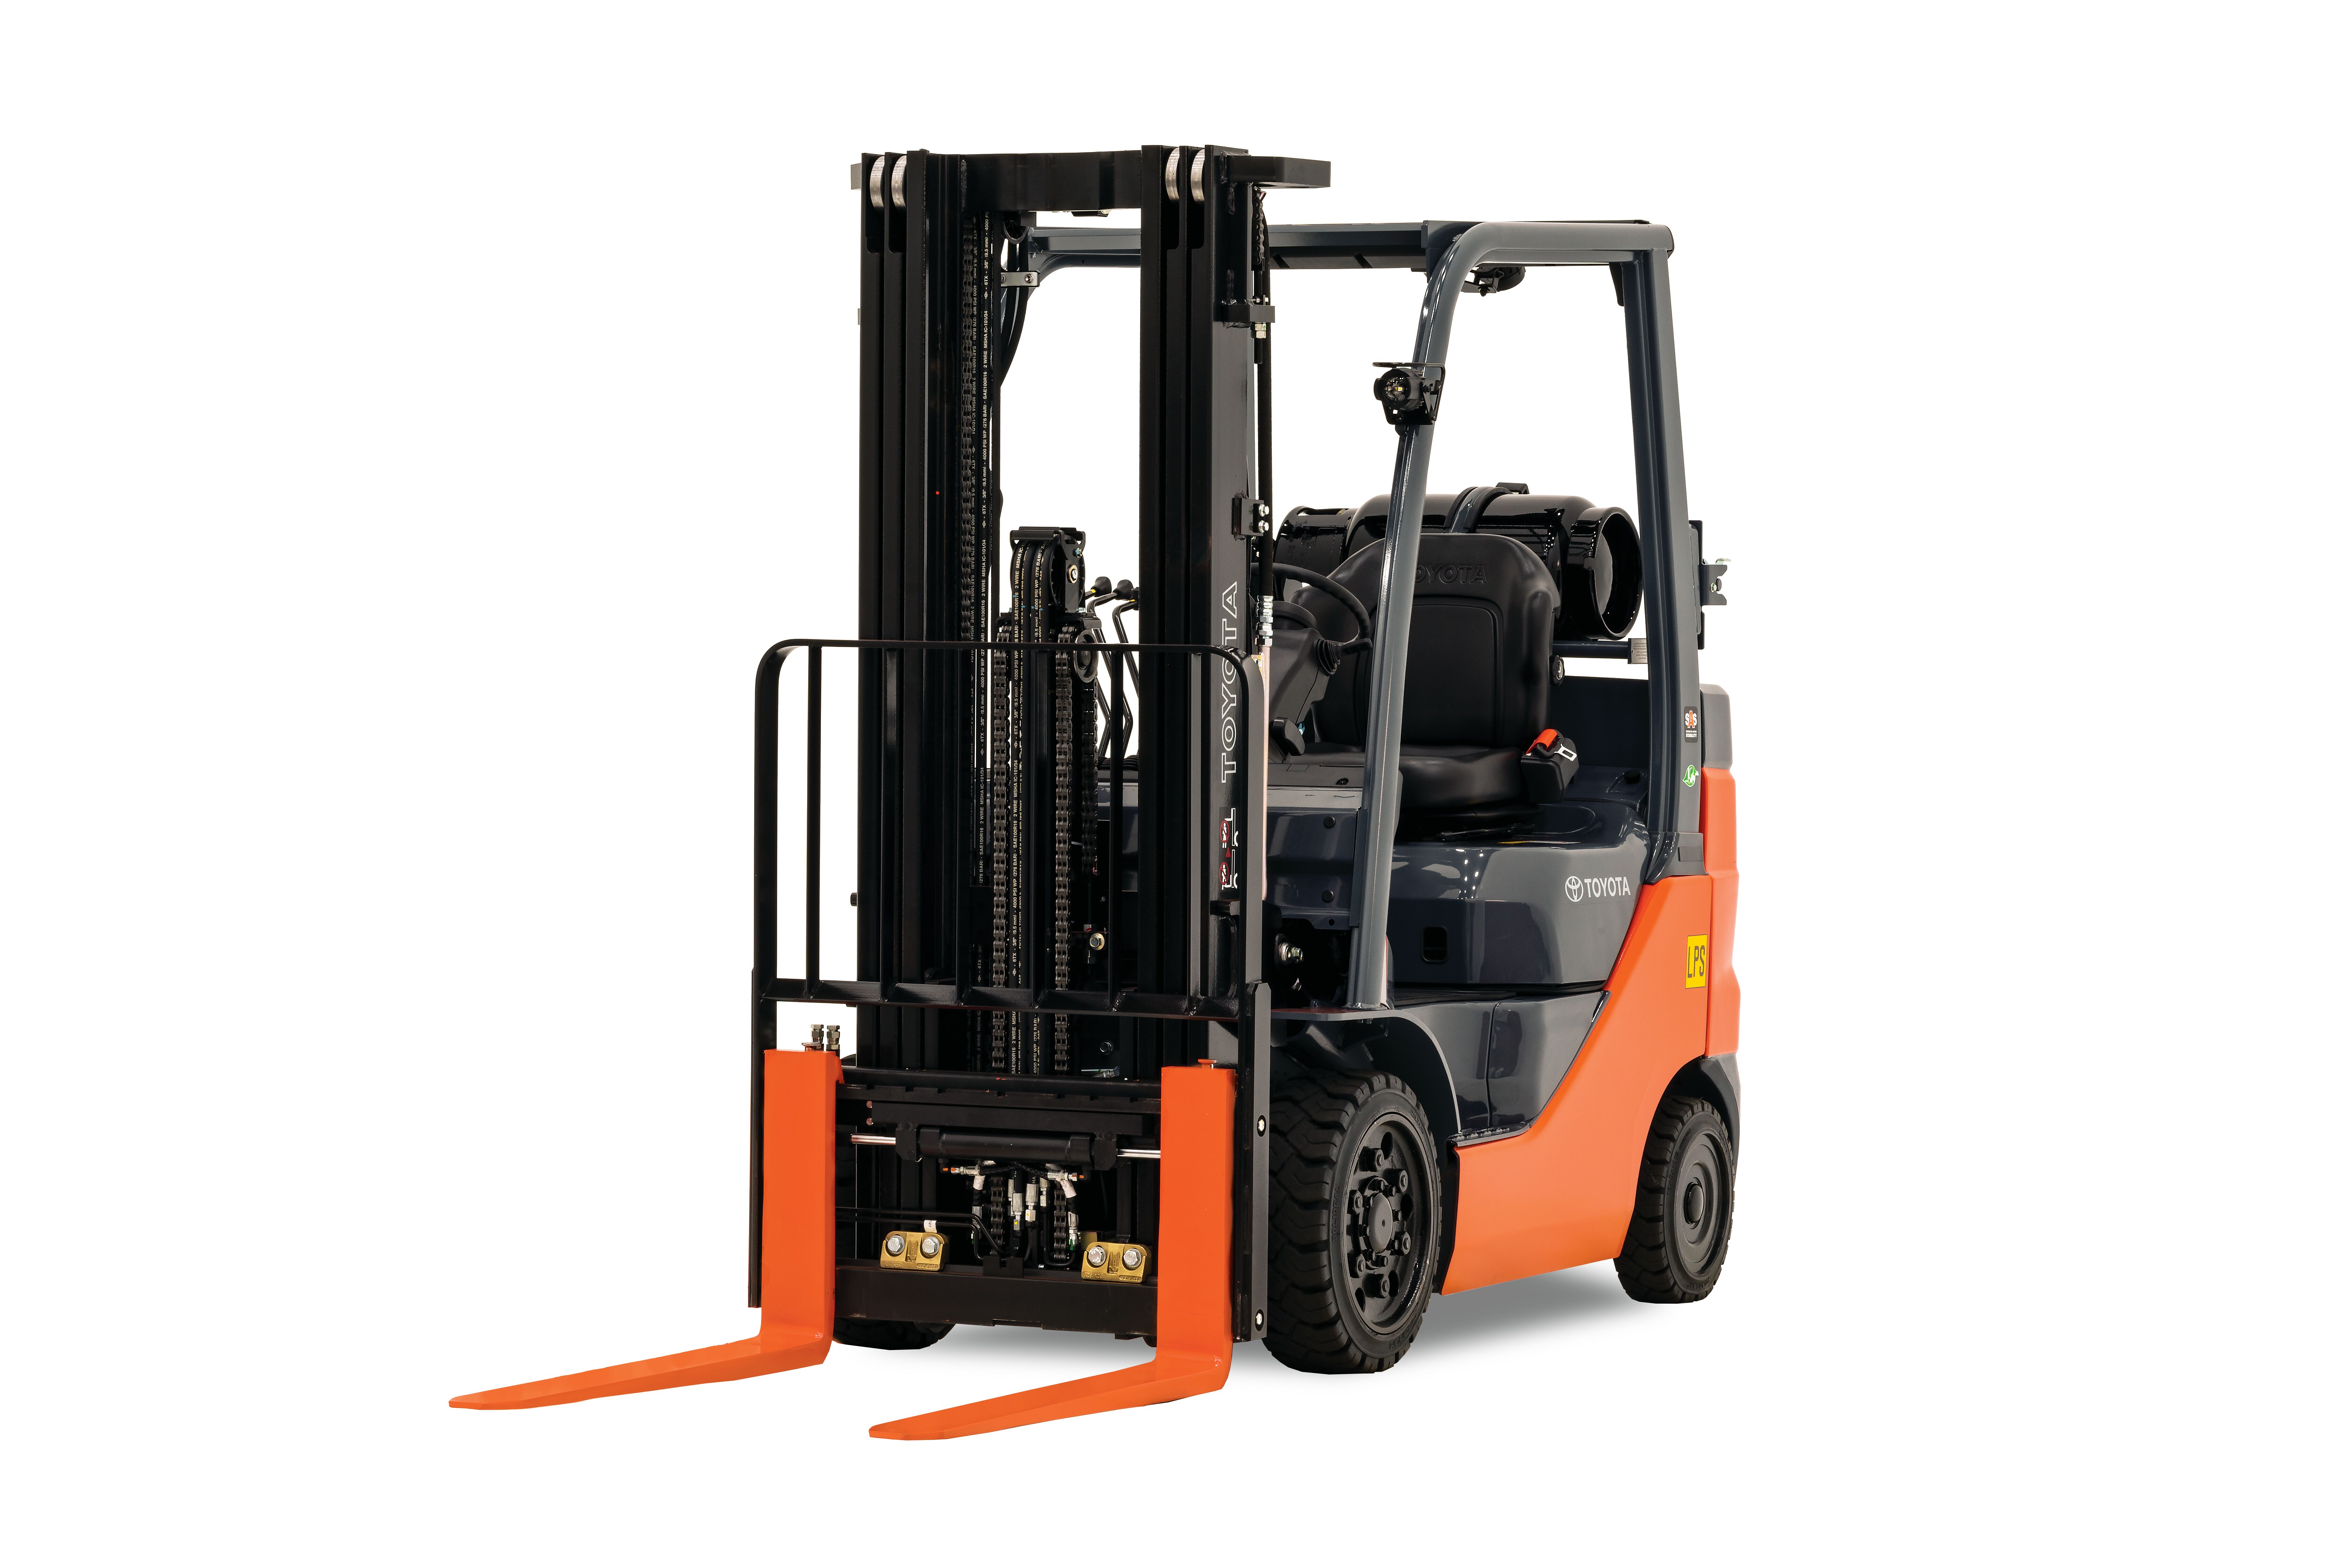 https://www.toyotaforklift.com/content/dam/tmh/marketing/en/general-gallery/forklift-pricing-101-what-you-should-know.jpg